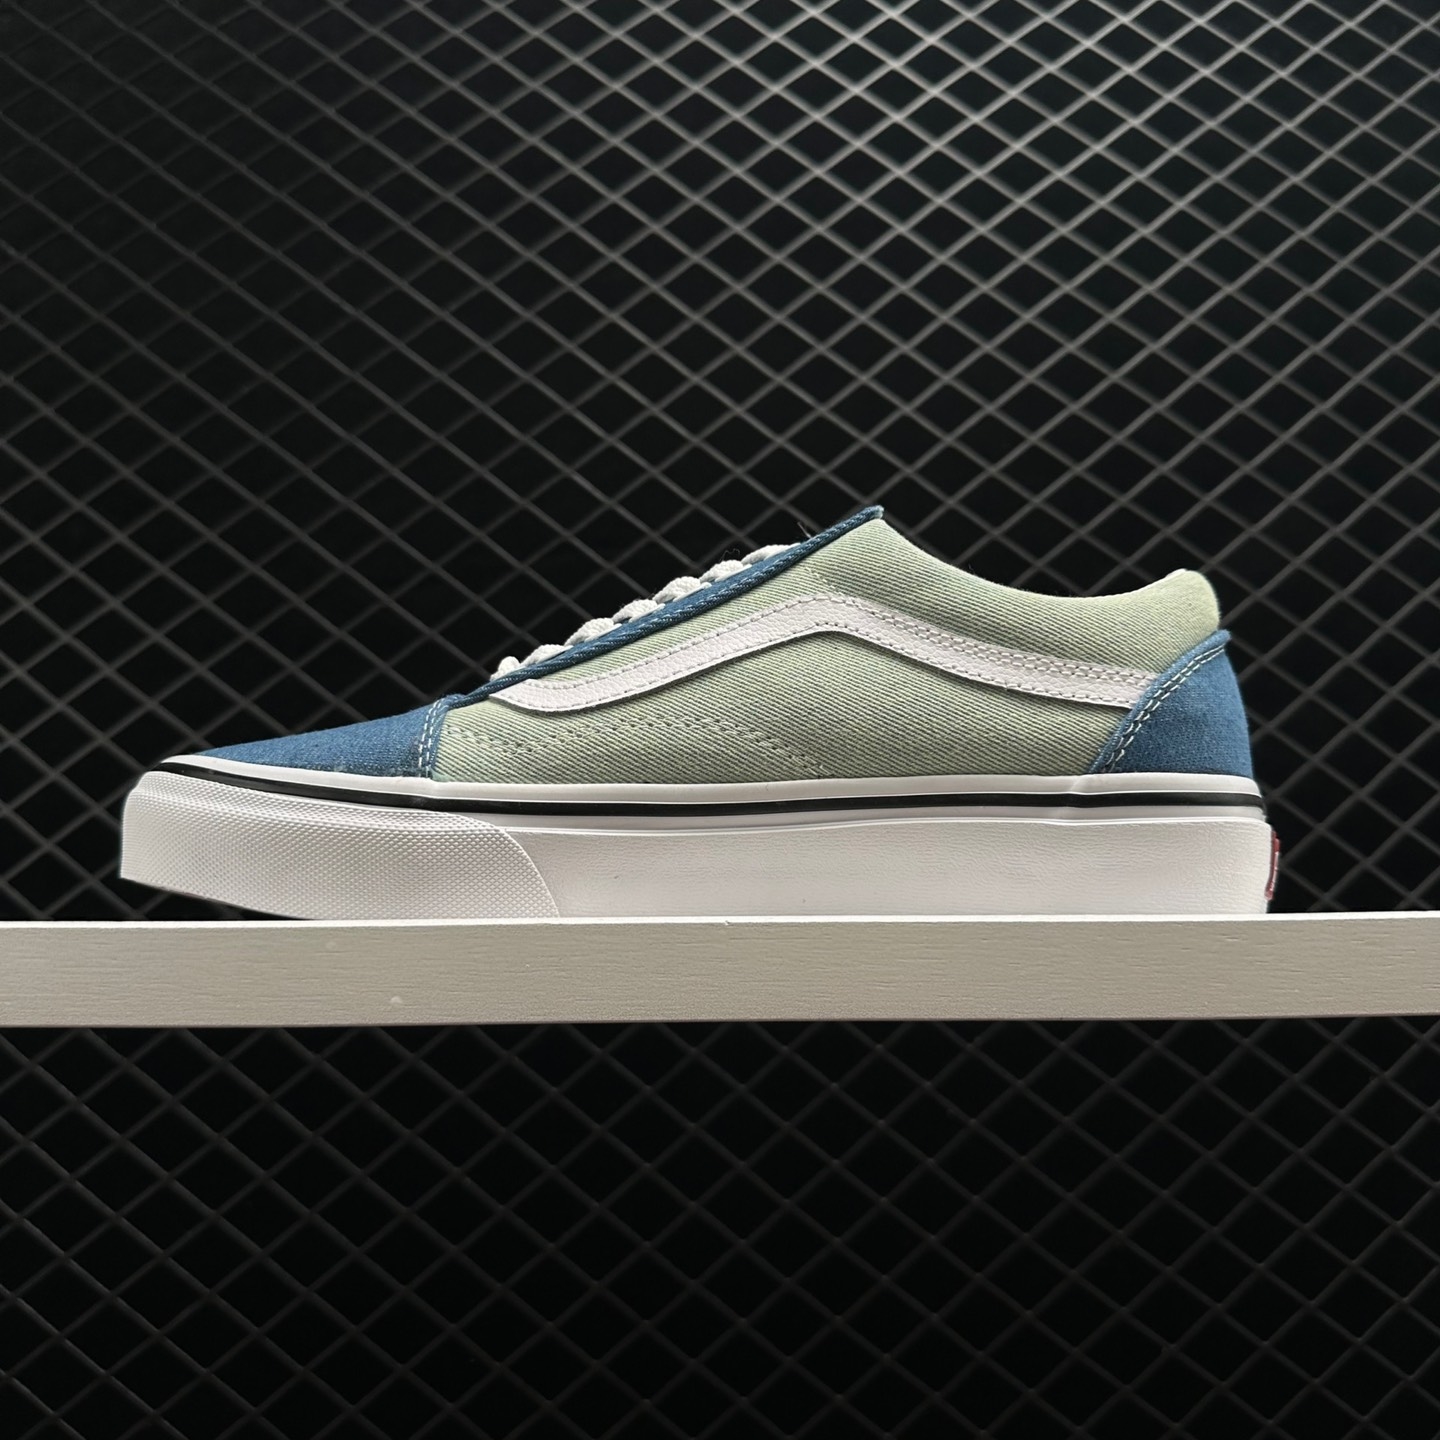 Vans Old Skool 36 DX Gray Green White - Stylish and Classic Sneakers